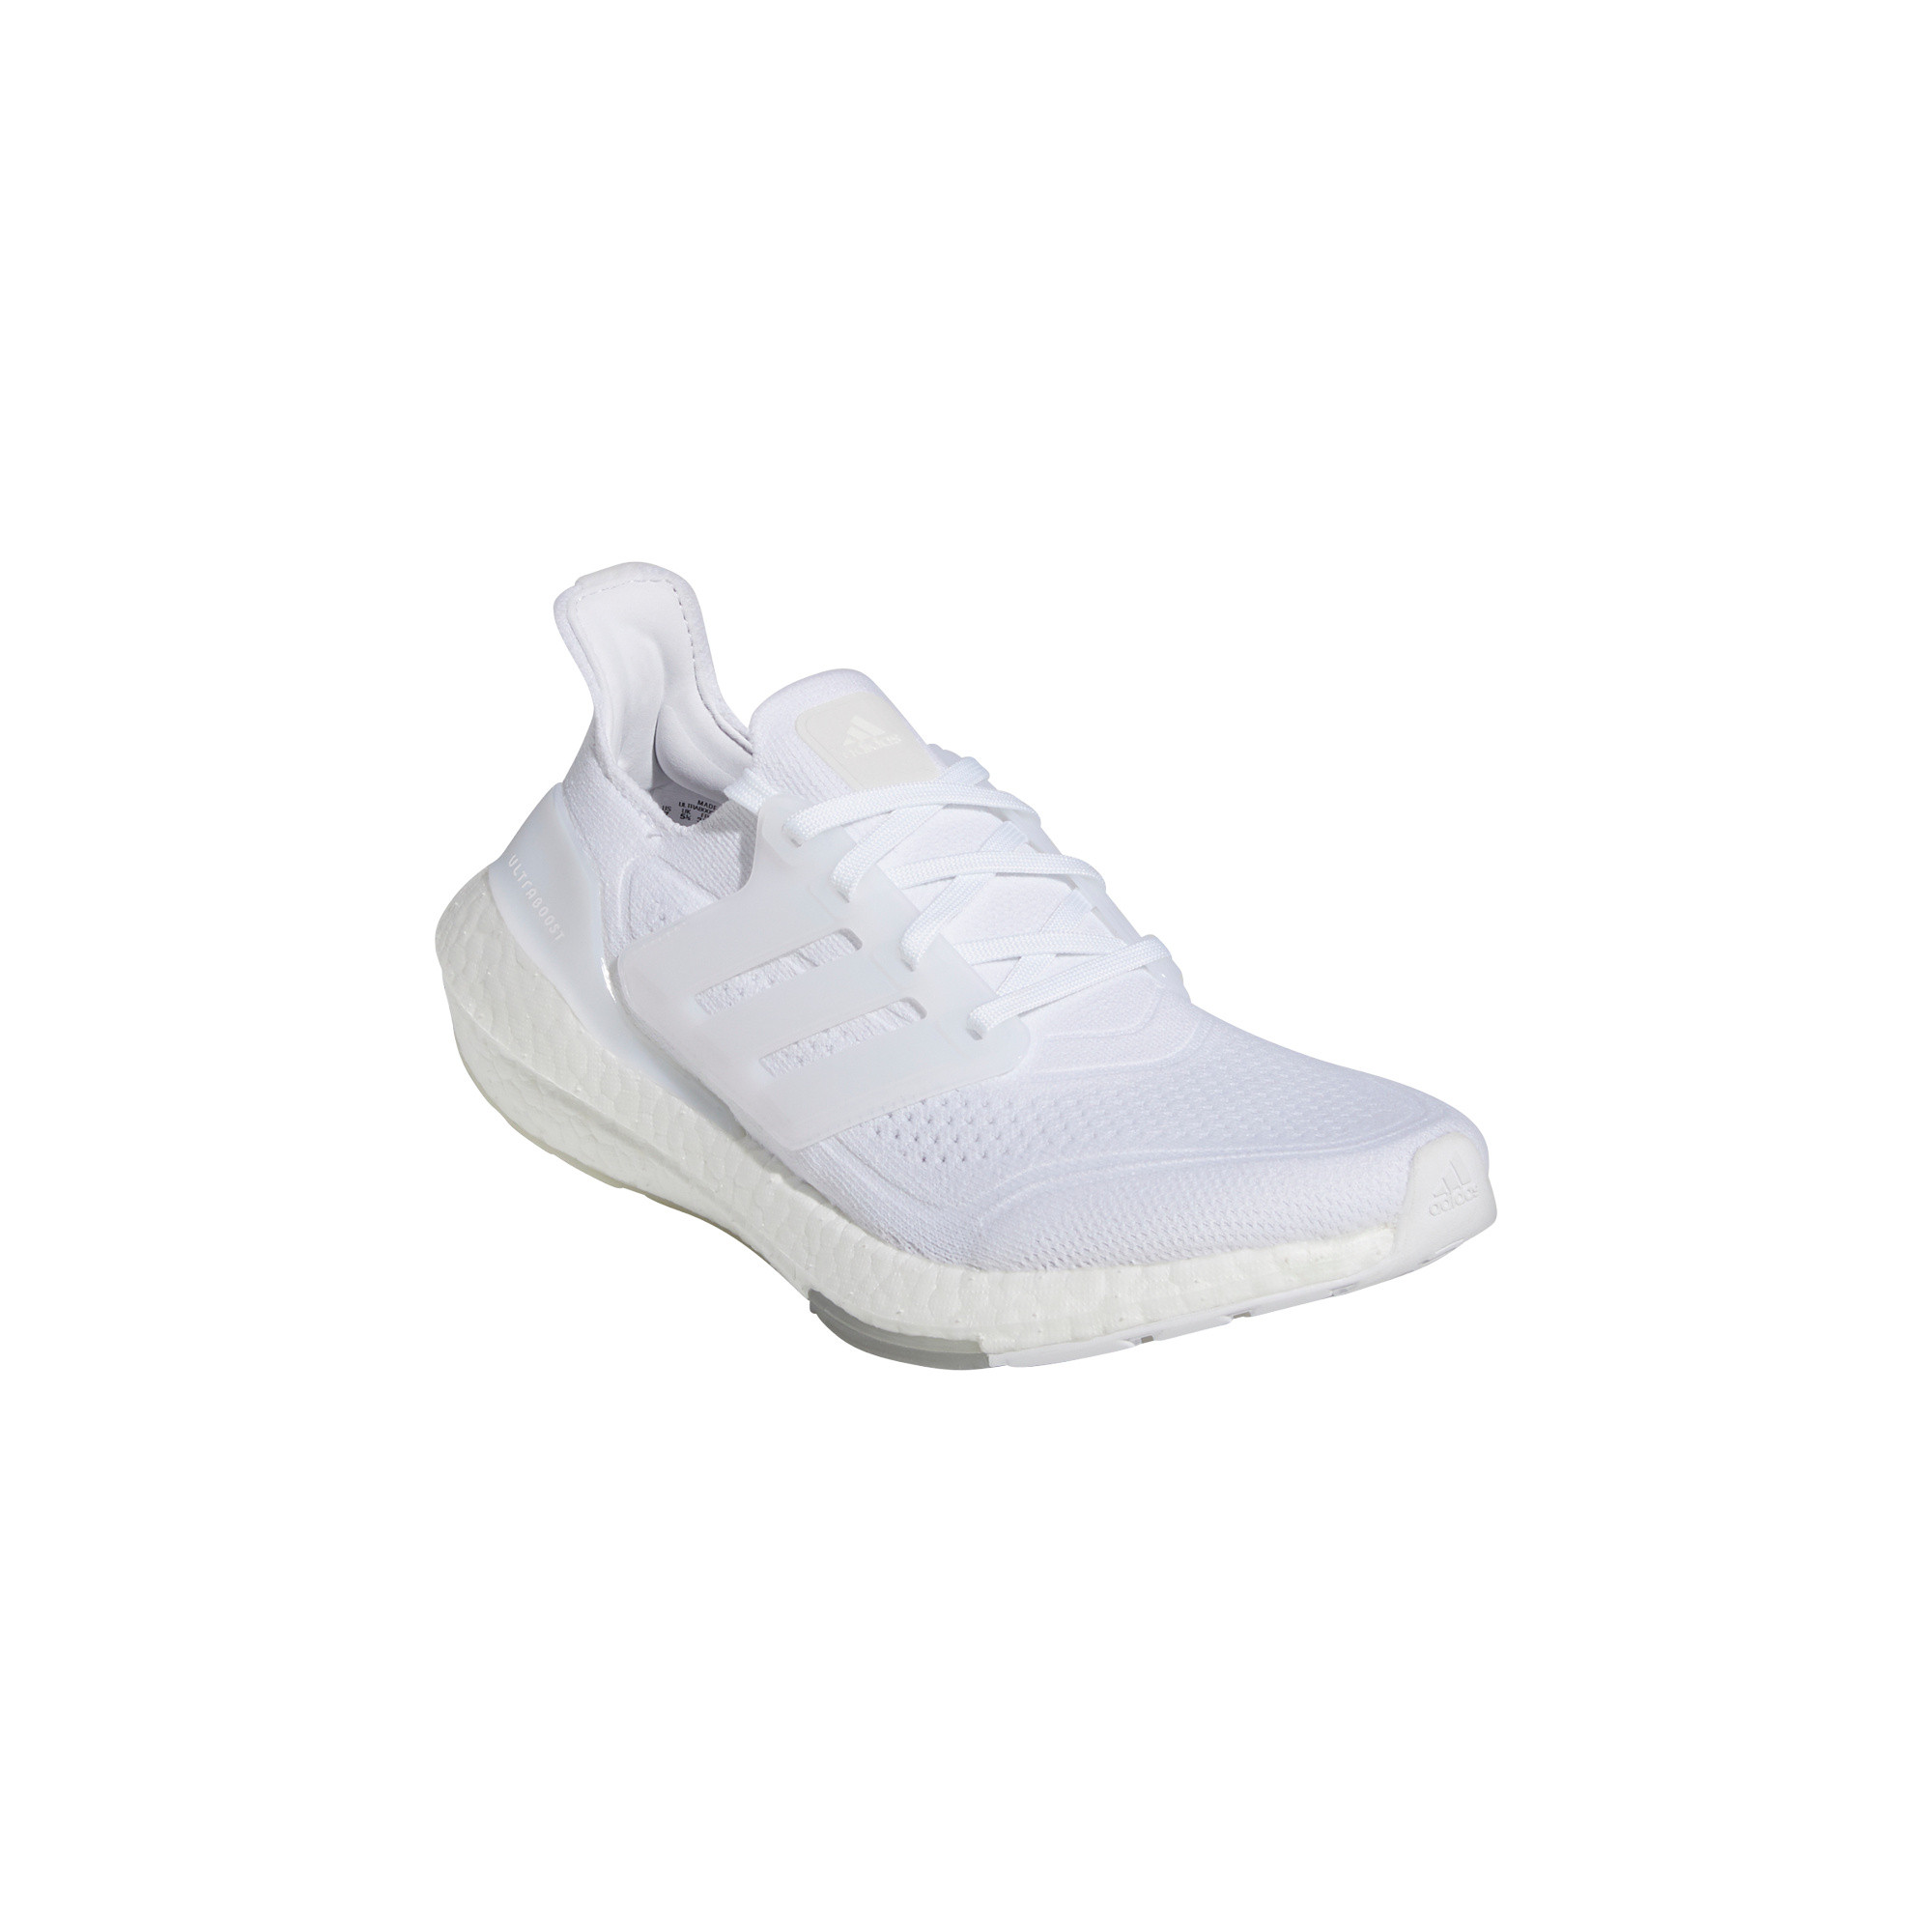 Ultraboost 21 Shoes, White, large image number 0